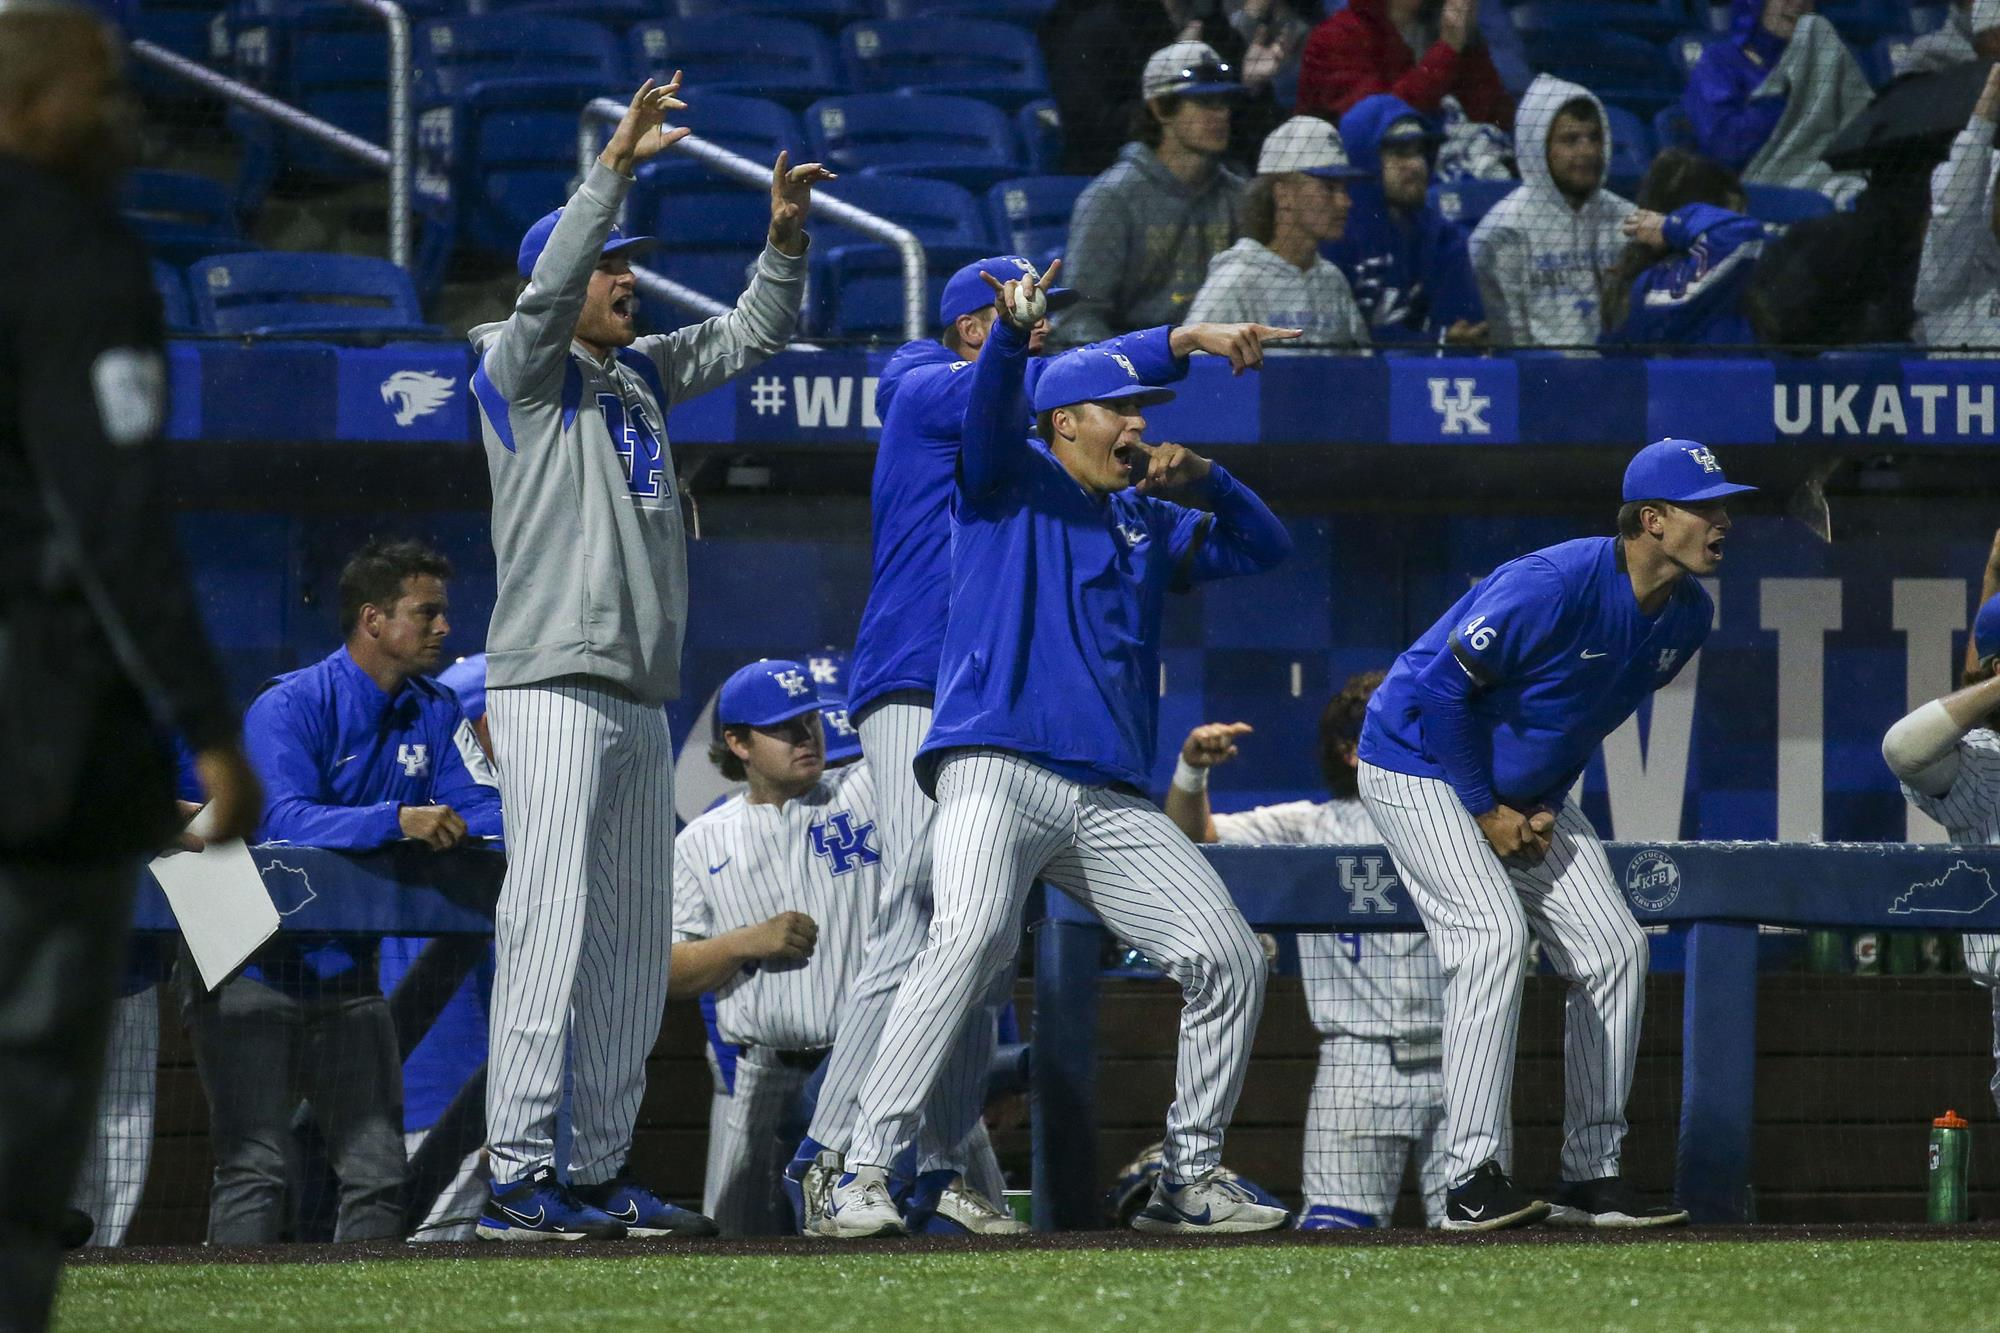 Squeezed: Kentucky Wins Series vs. Top-Ranked Tennessee